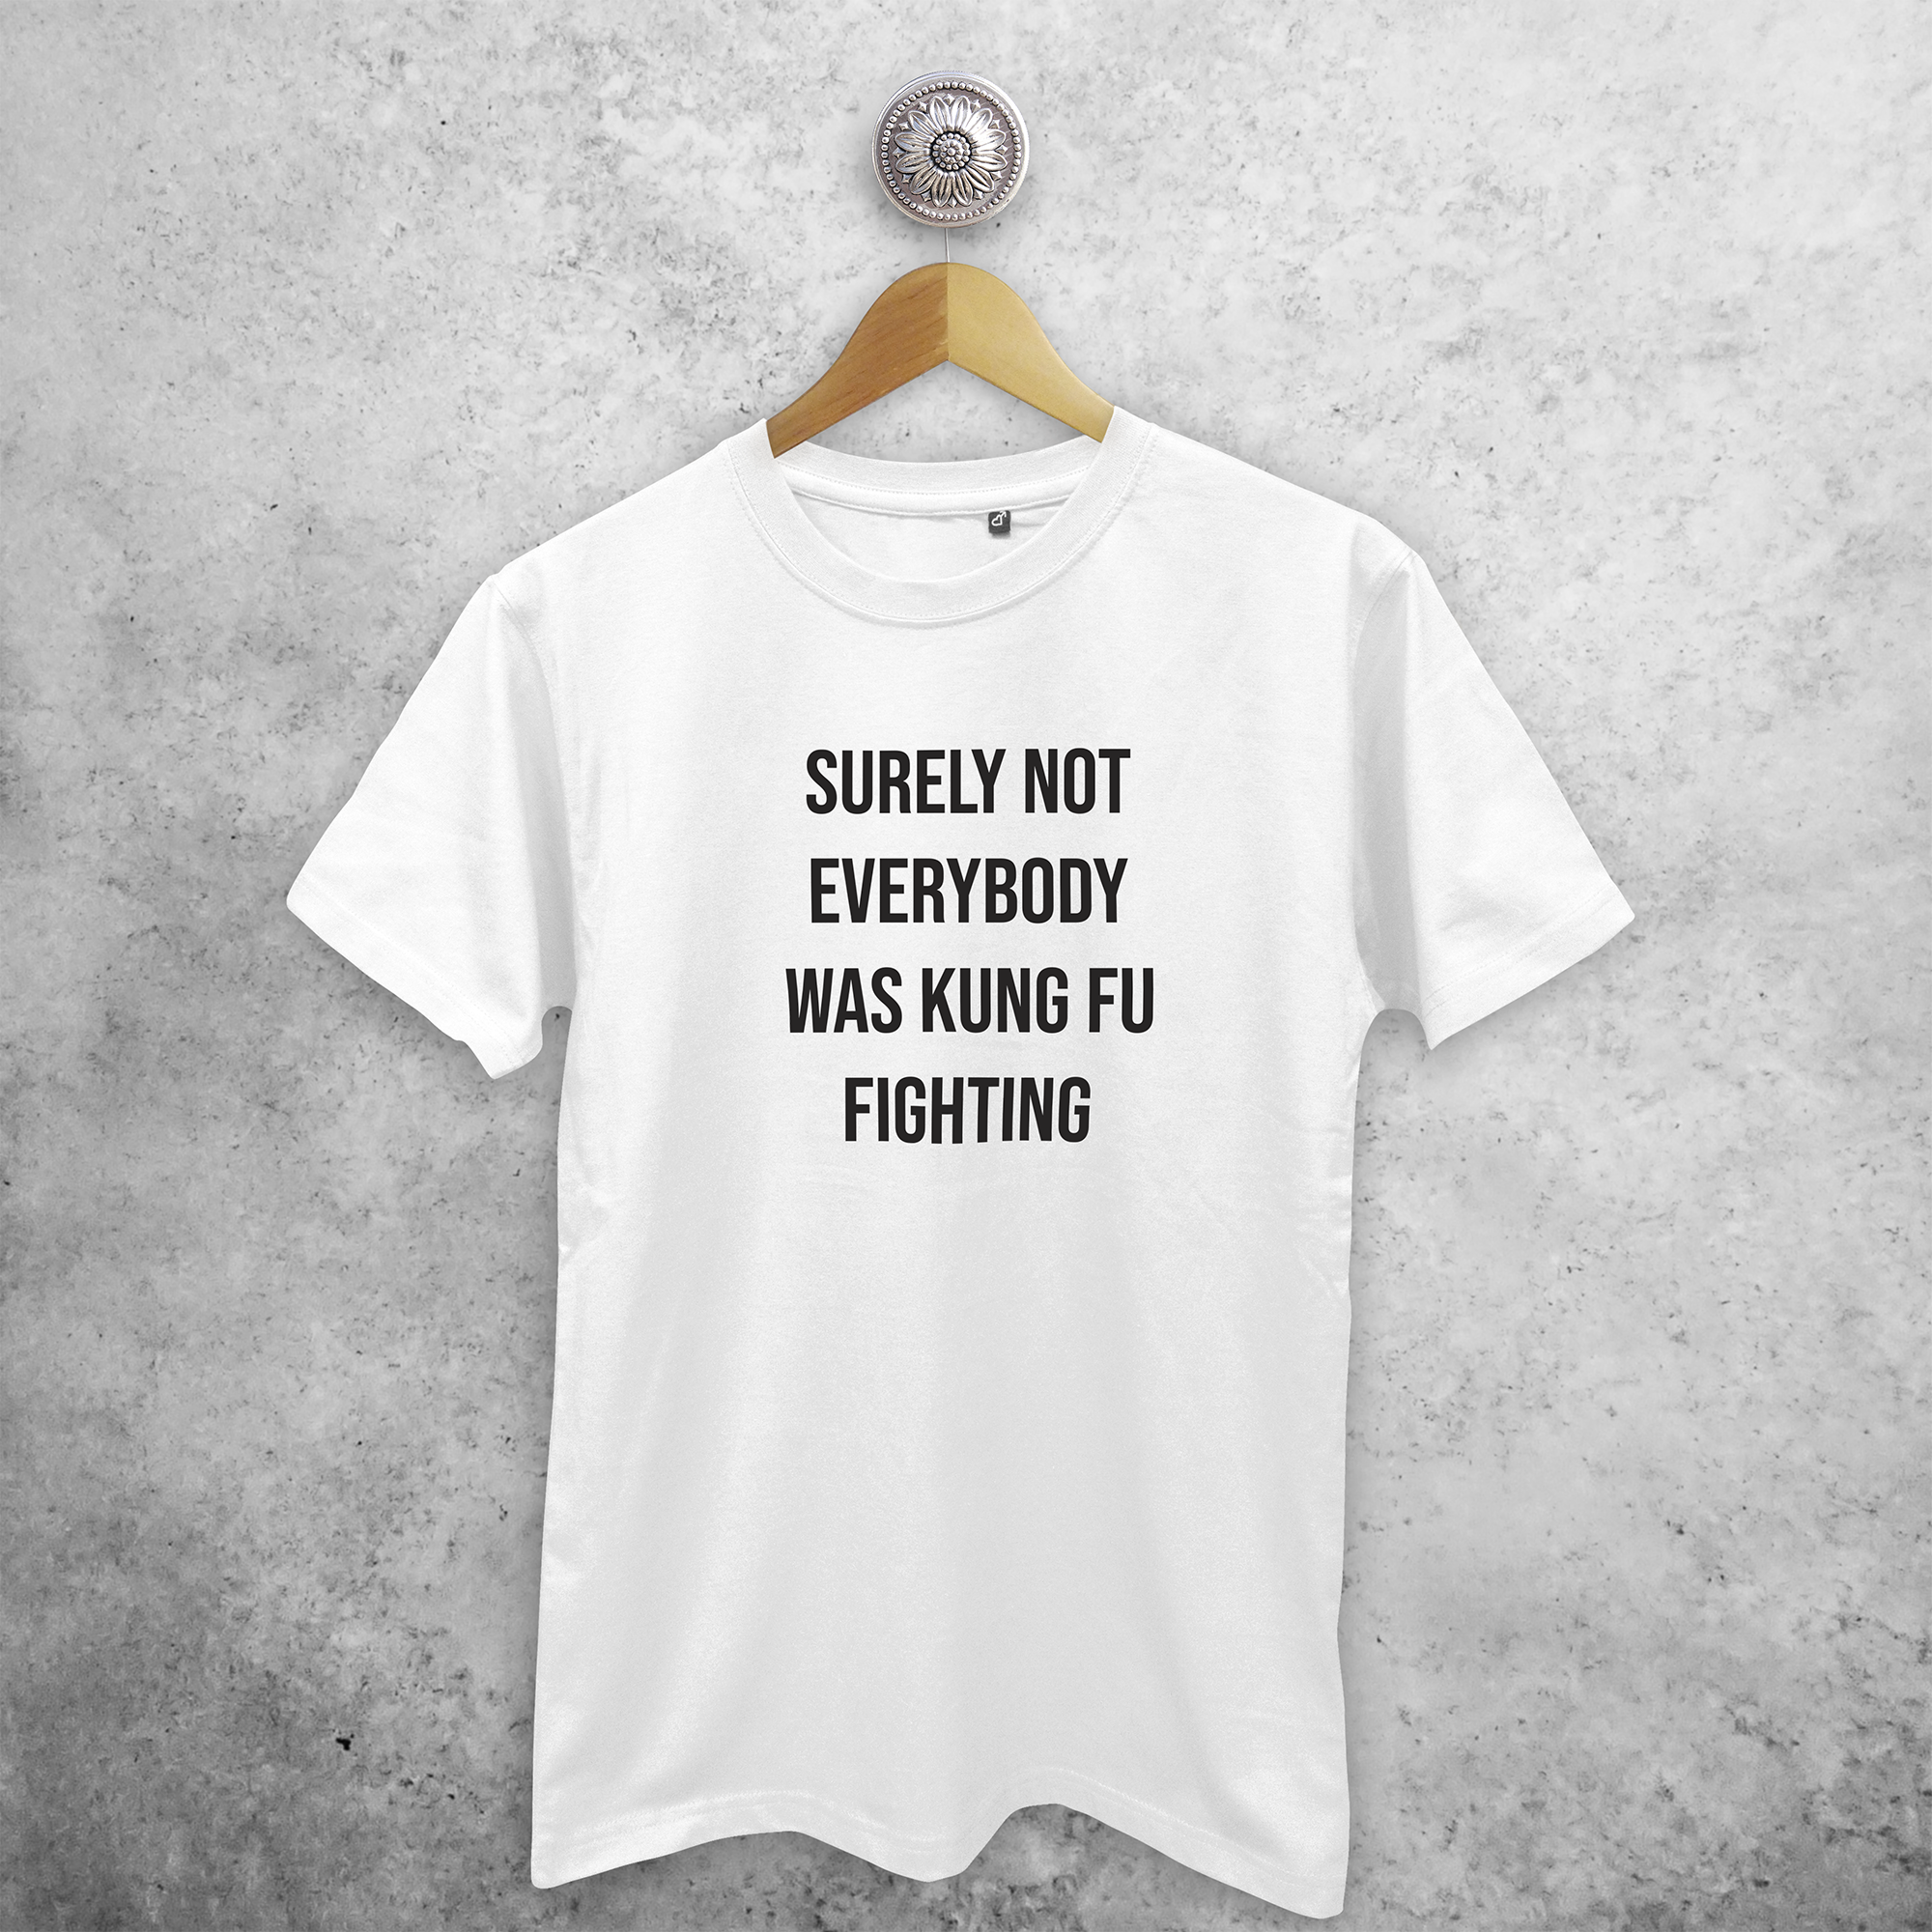 'Surely not everybody was kung fu fighting' adult shirt